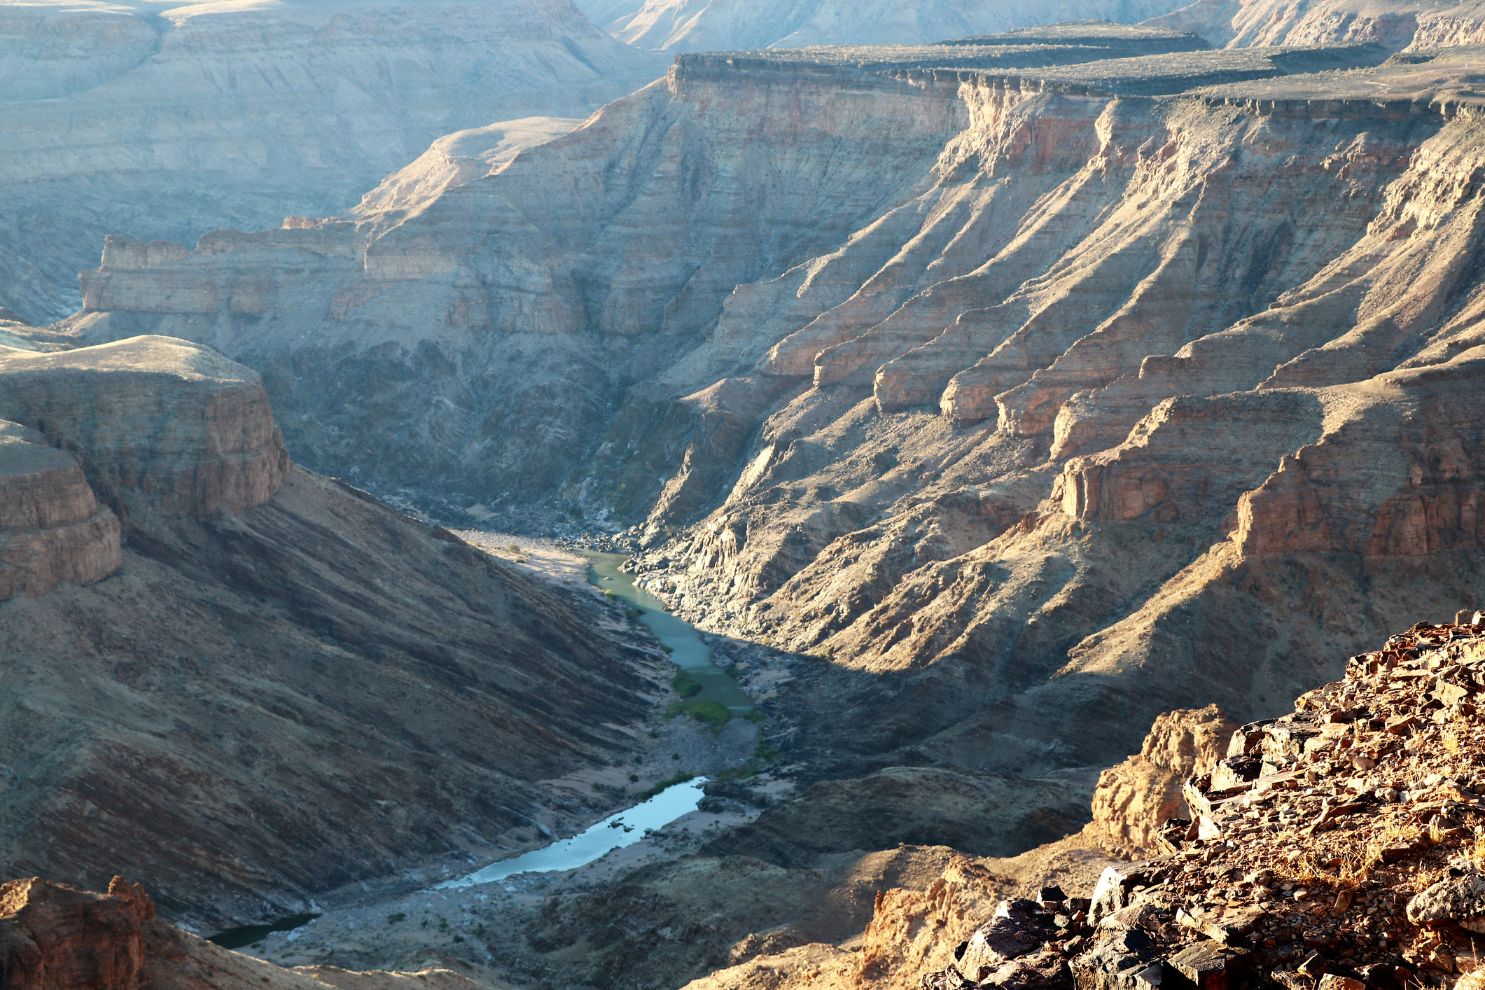 Fish River Canyon, the second largest canyon in the world. Photo: Getty Images